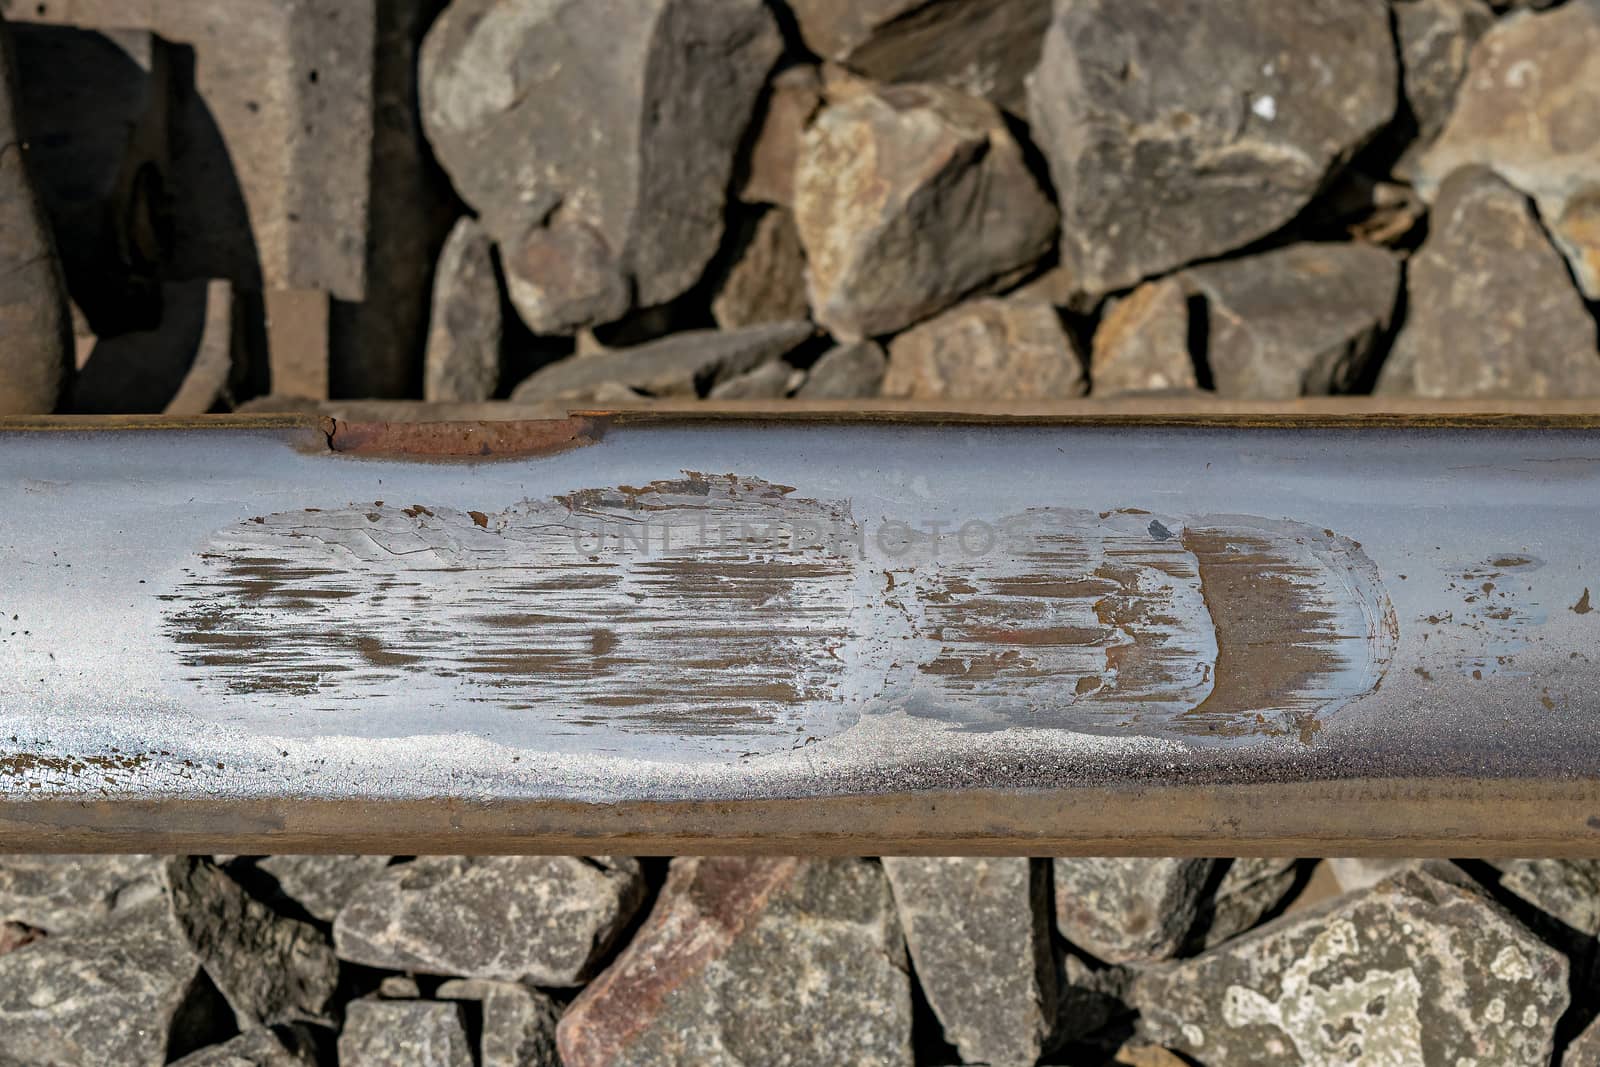 Close up image of eroded steel rail due to friction. Steel rails often get eroded due wheel slippage & friction of heavy locomotive as they try to pull heavy trains.